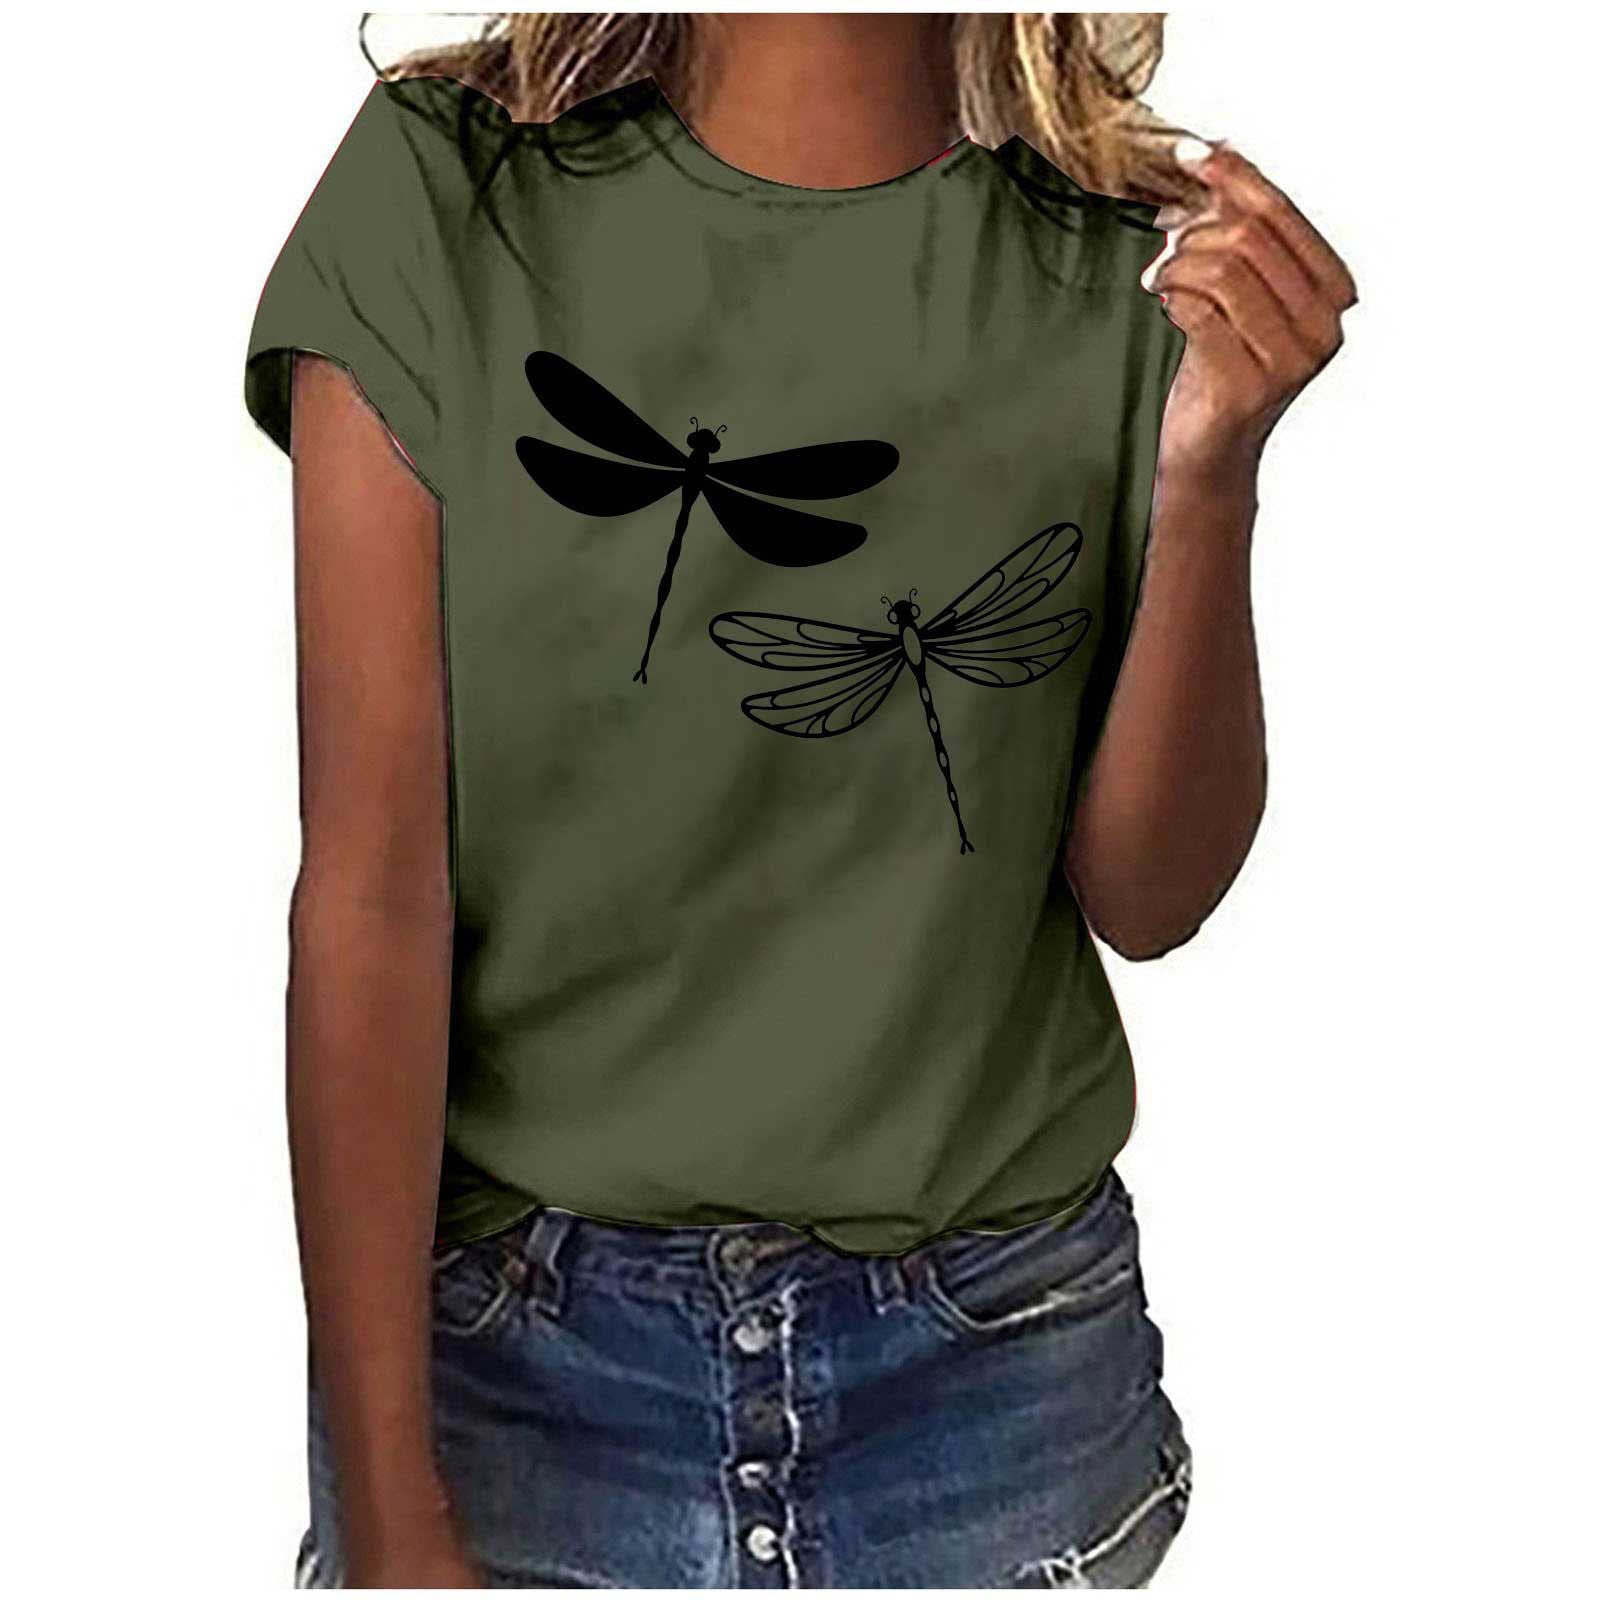 Womens Going Out Tops, Women's Round Neck Loose Fit T-Shirt Short Sleeve  Tops Plus Size Fashion Tee Womens Going Out Tops#army Green XX-Large